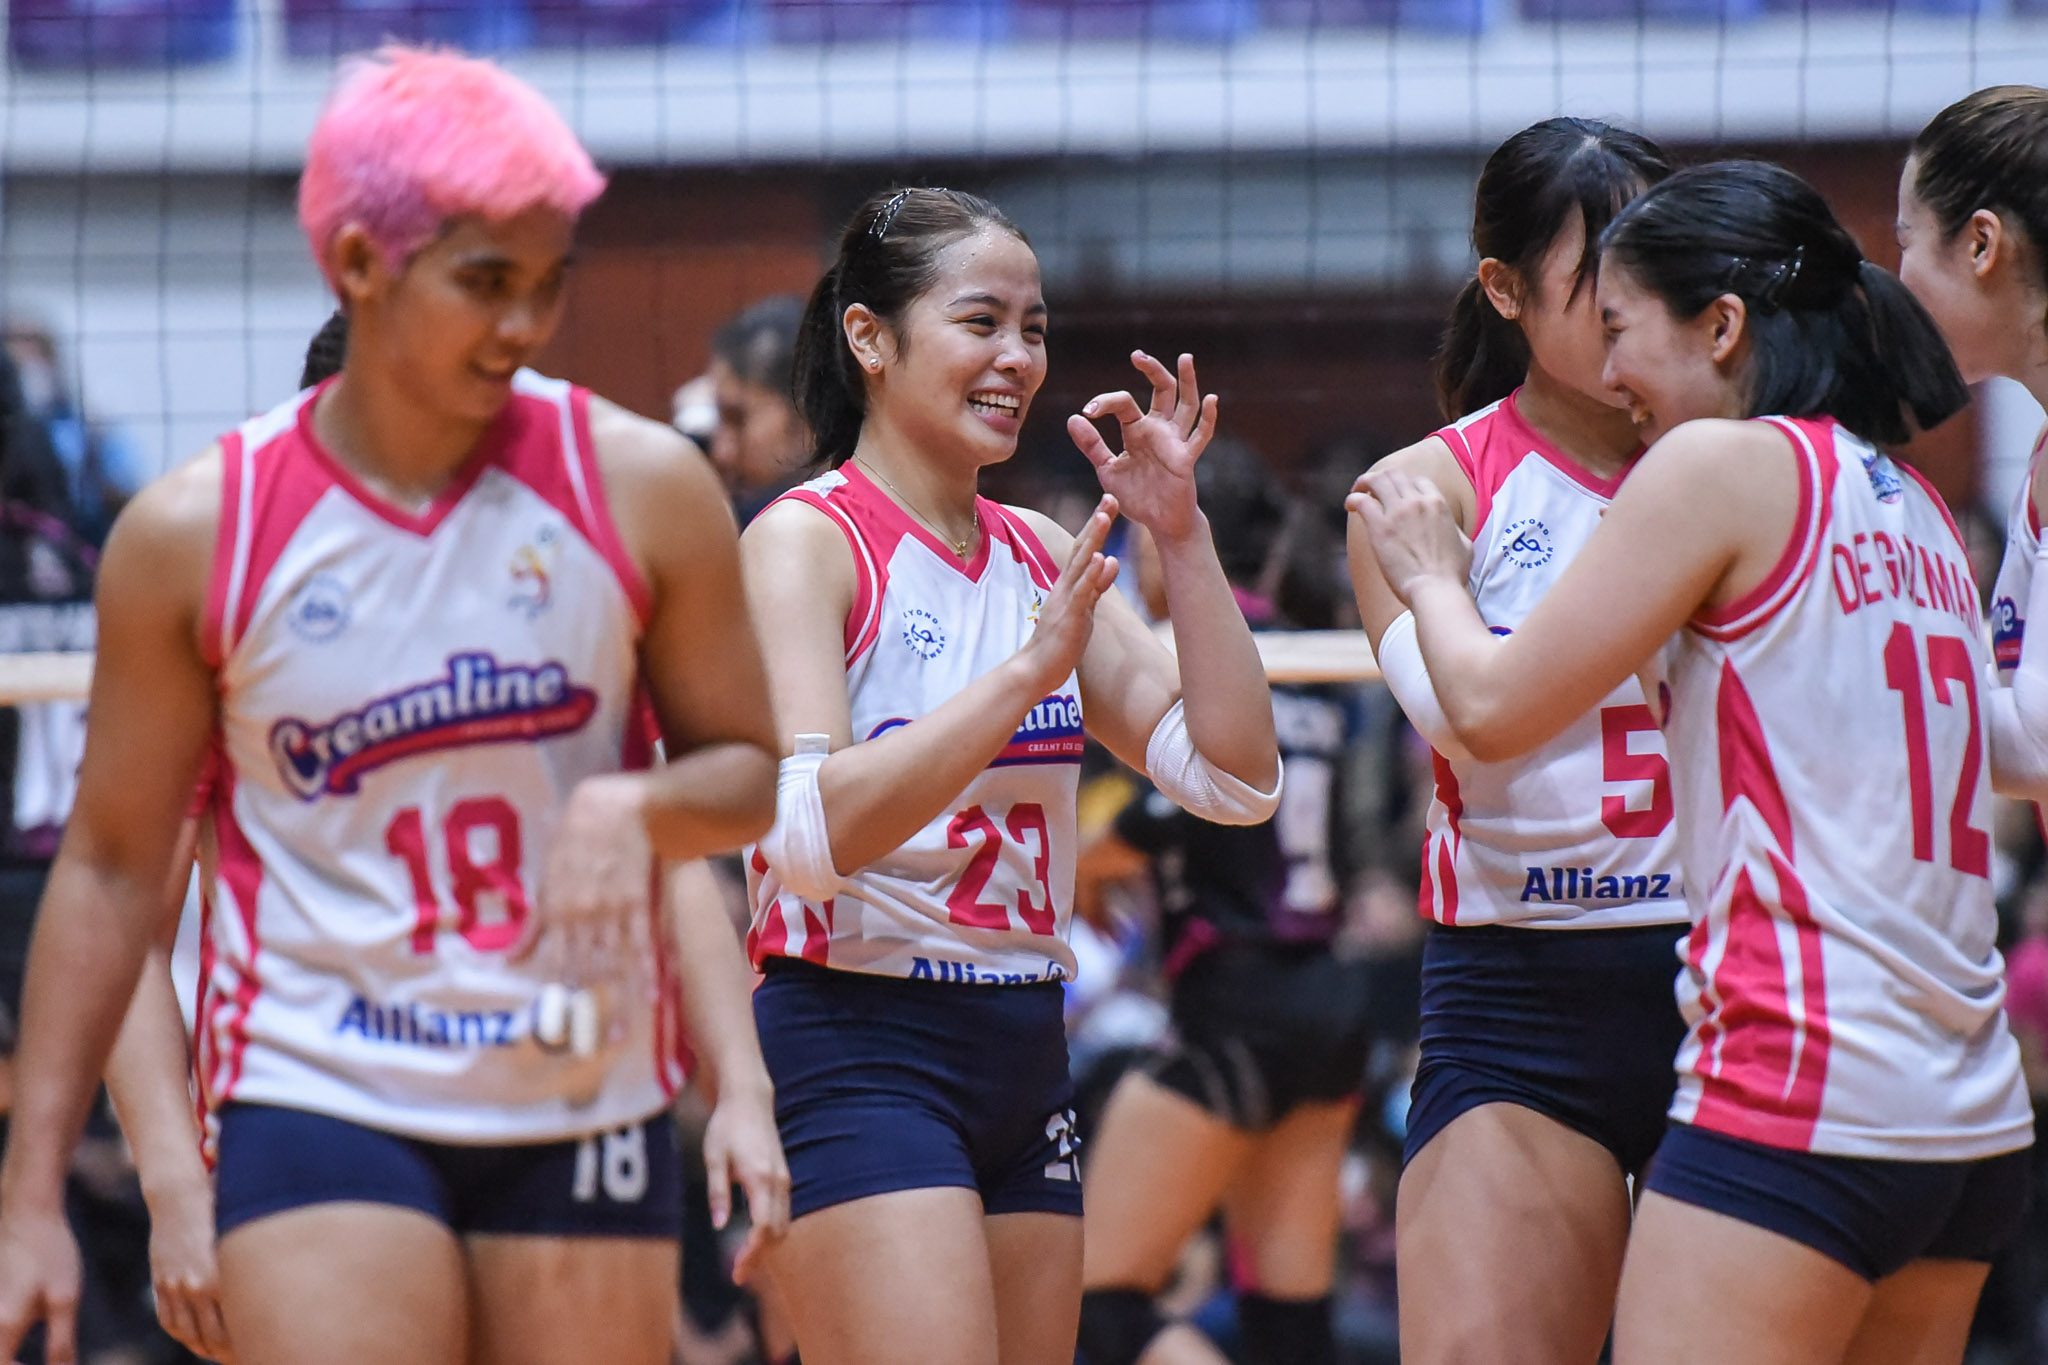 Creamline clinches top seed in Iloilo; Petro locks 2nd spot in Chery ouster